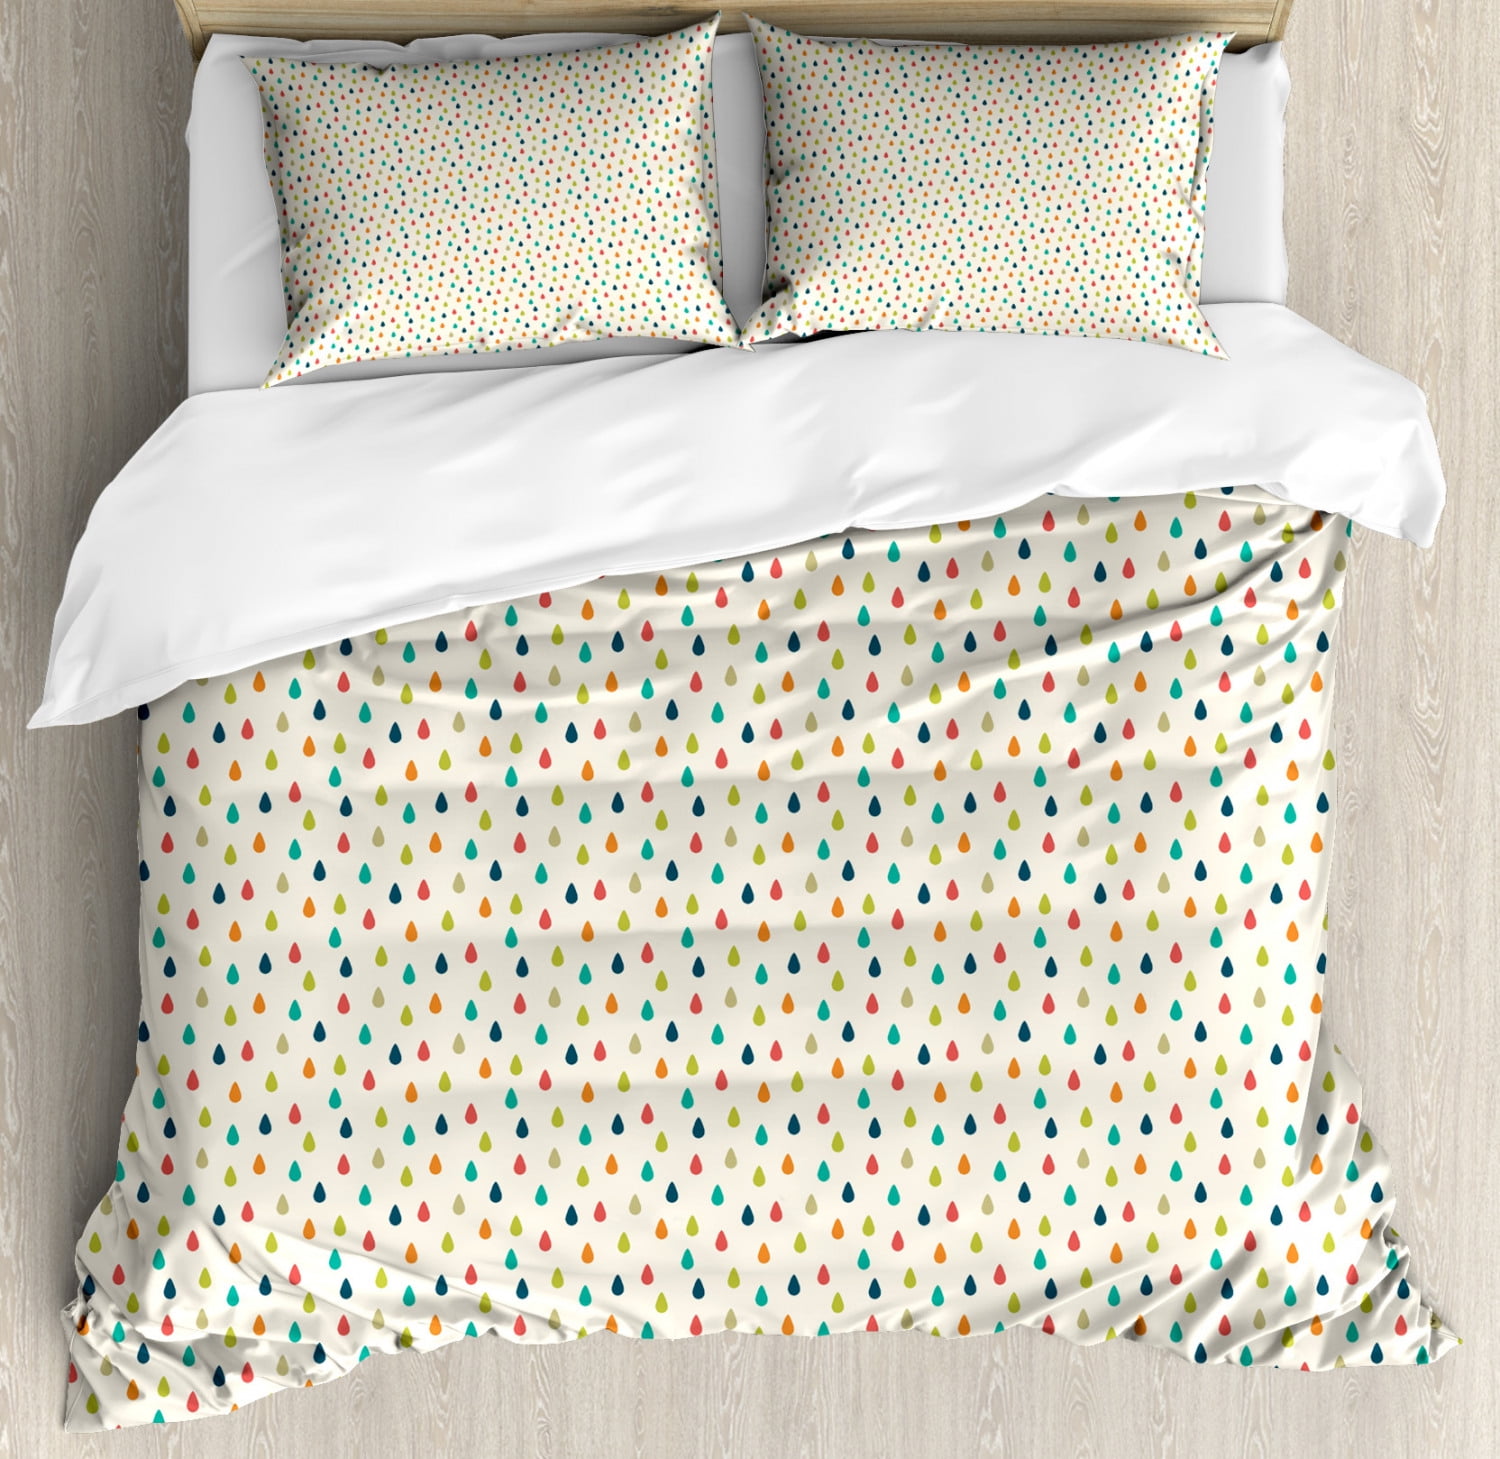 Retro Duvet Cover Set Colorful Graphic Design Waterdrops On White